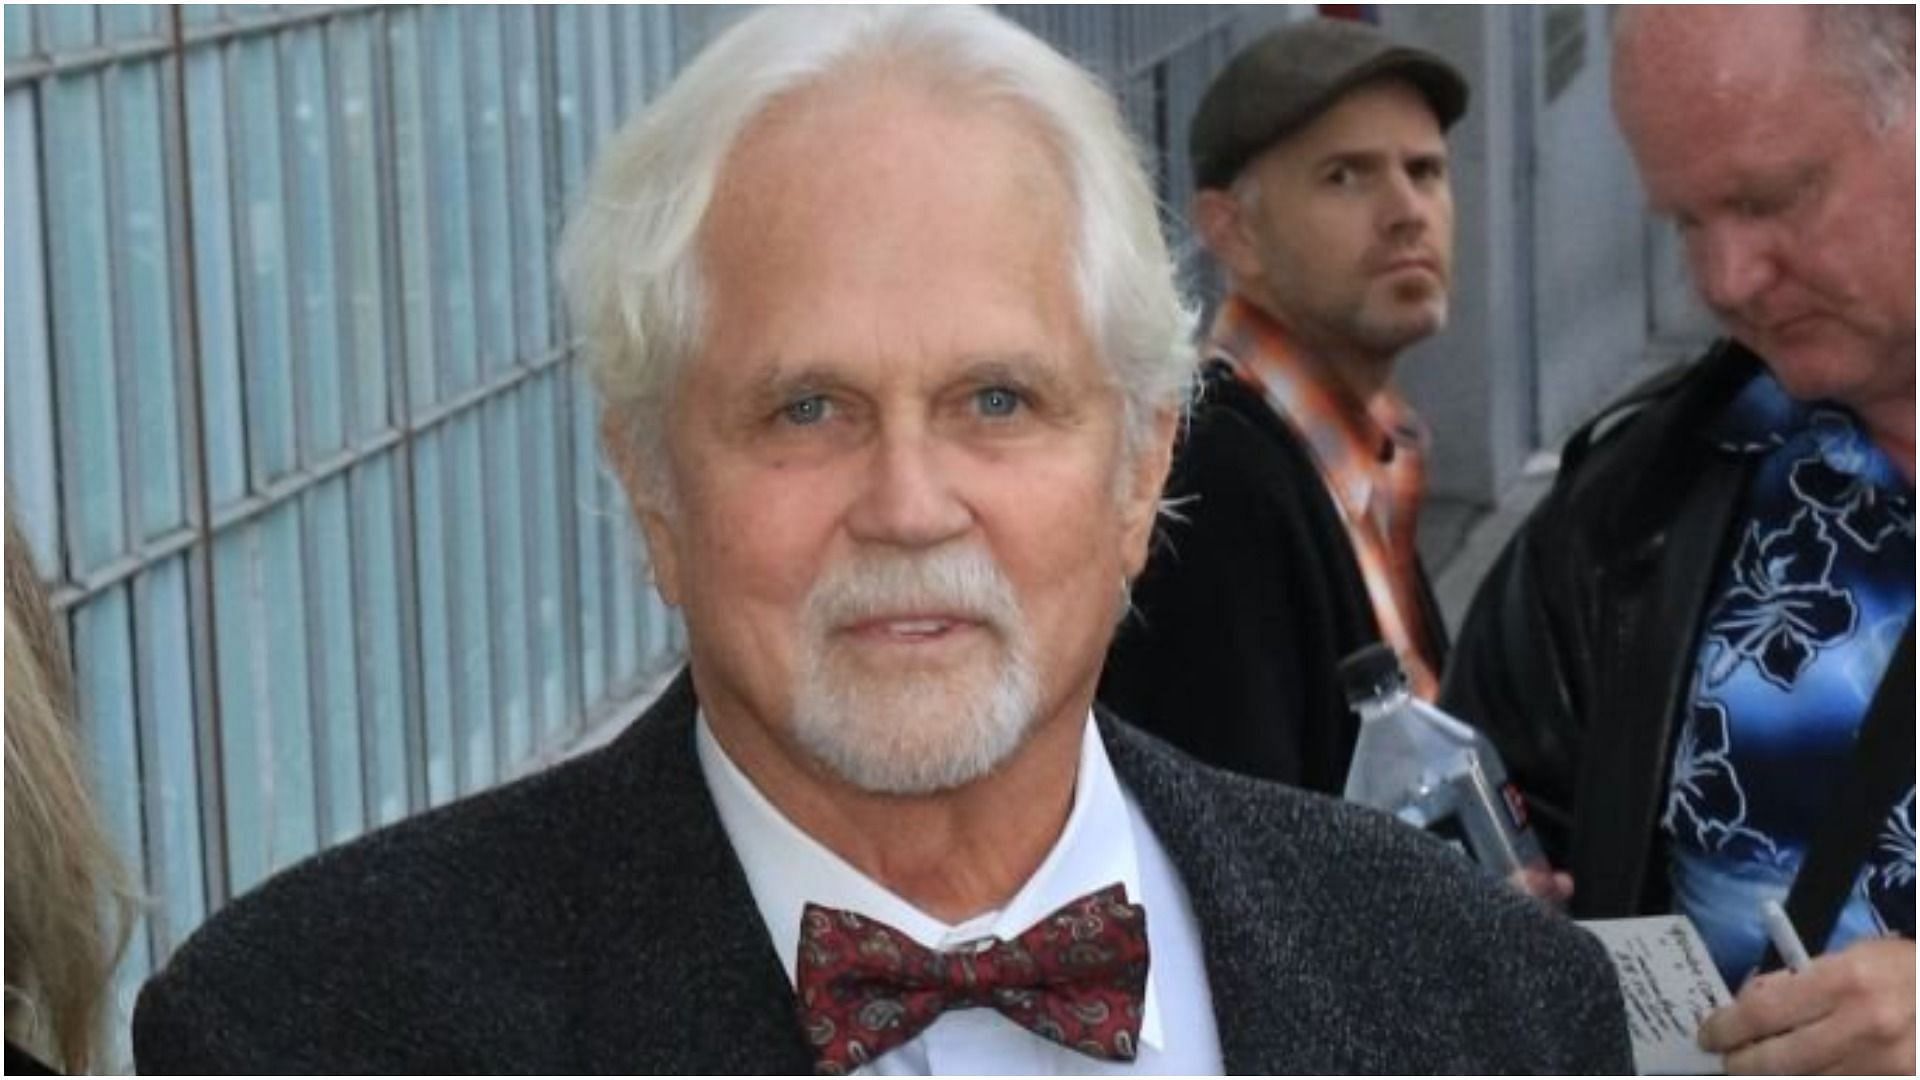 Tony Dow has appeared in several films and TV series (Image via Hollywood To You/Getty Images)